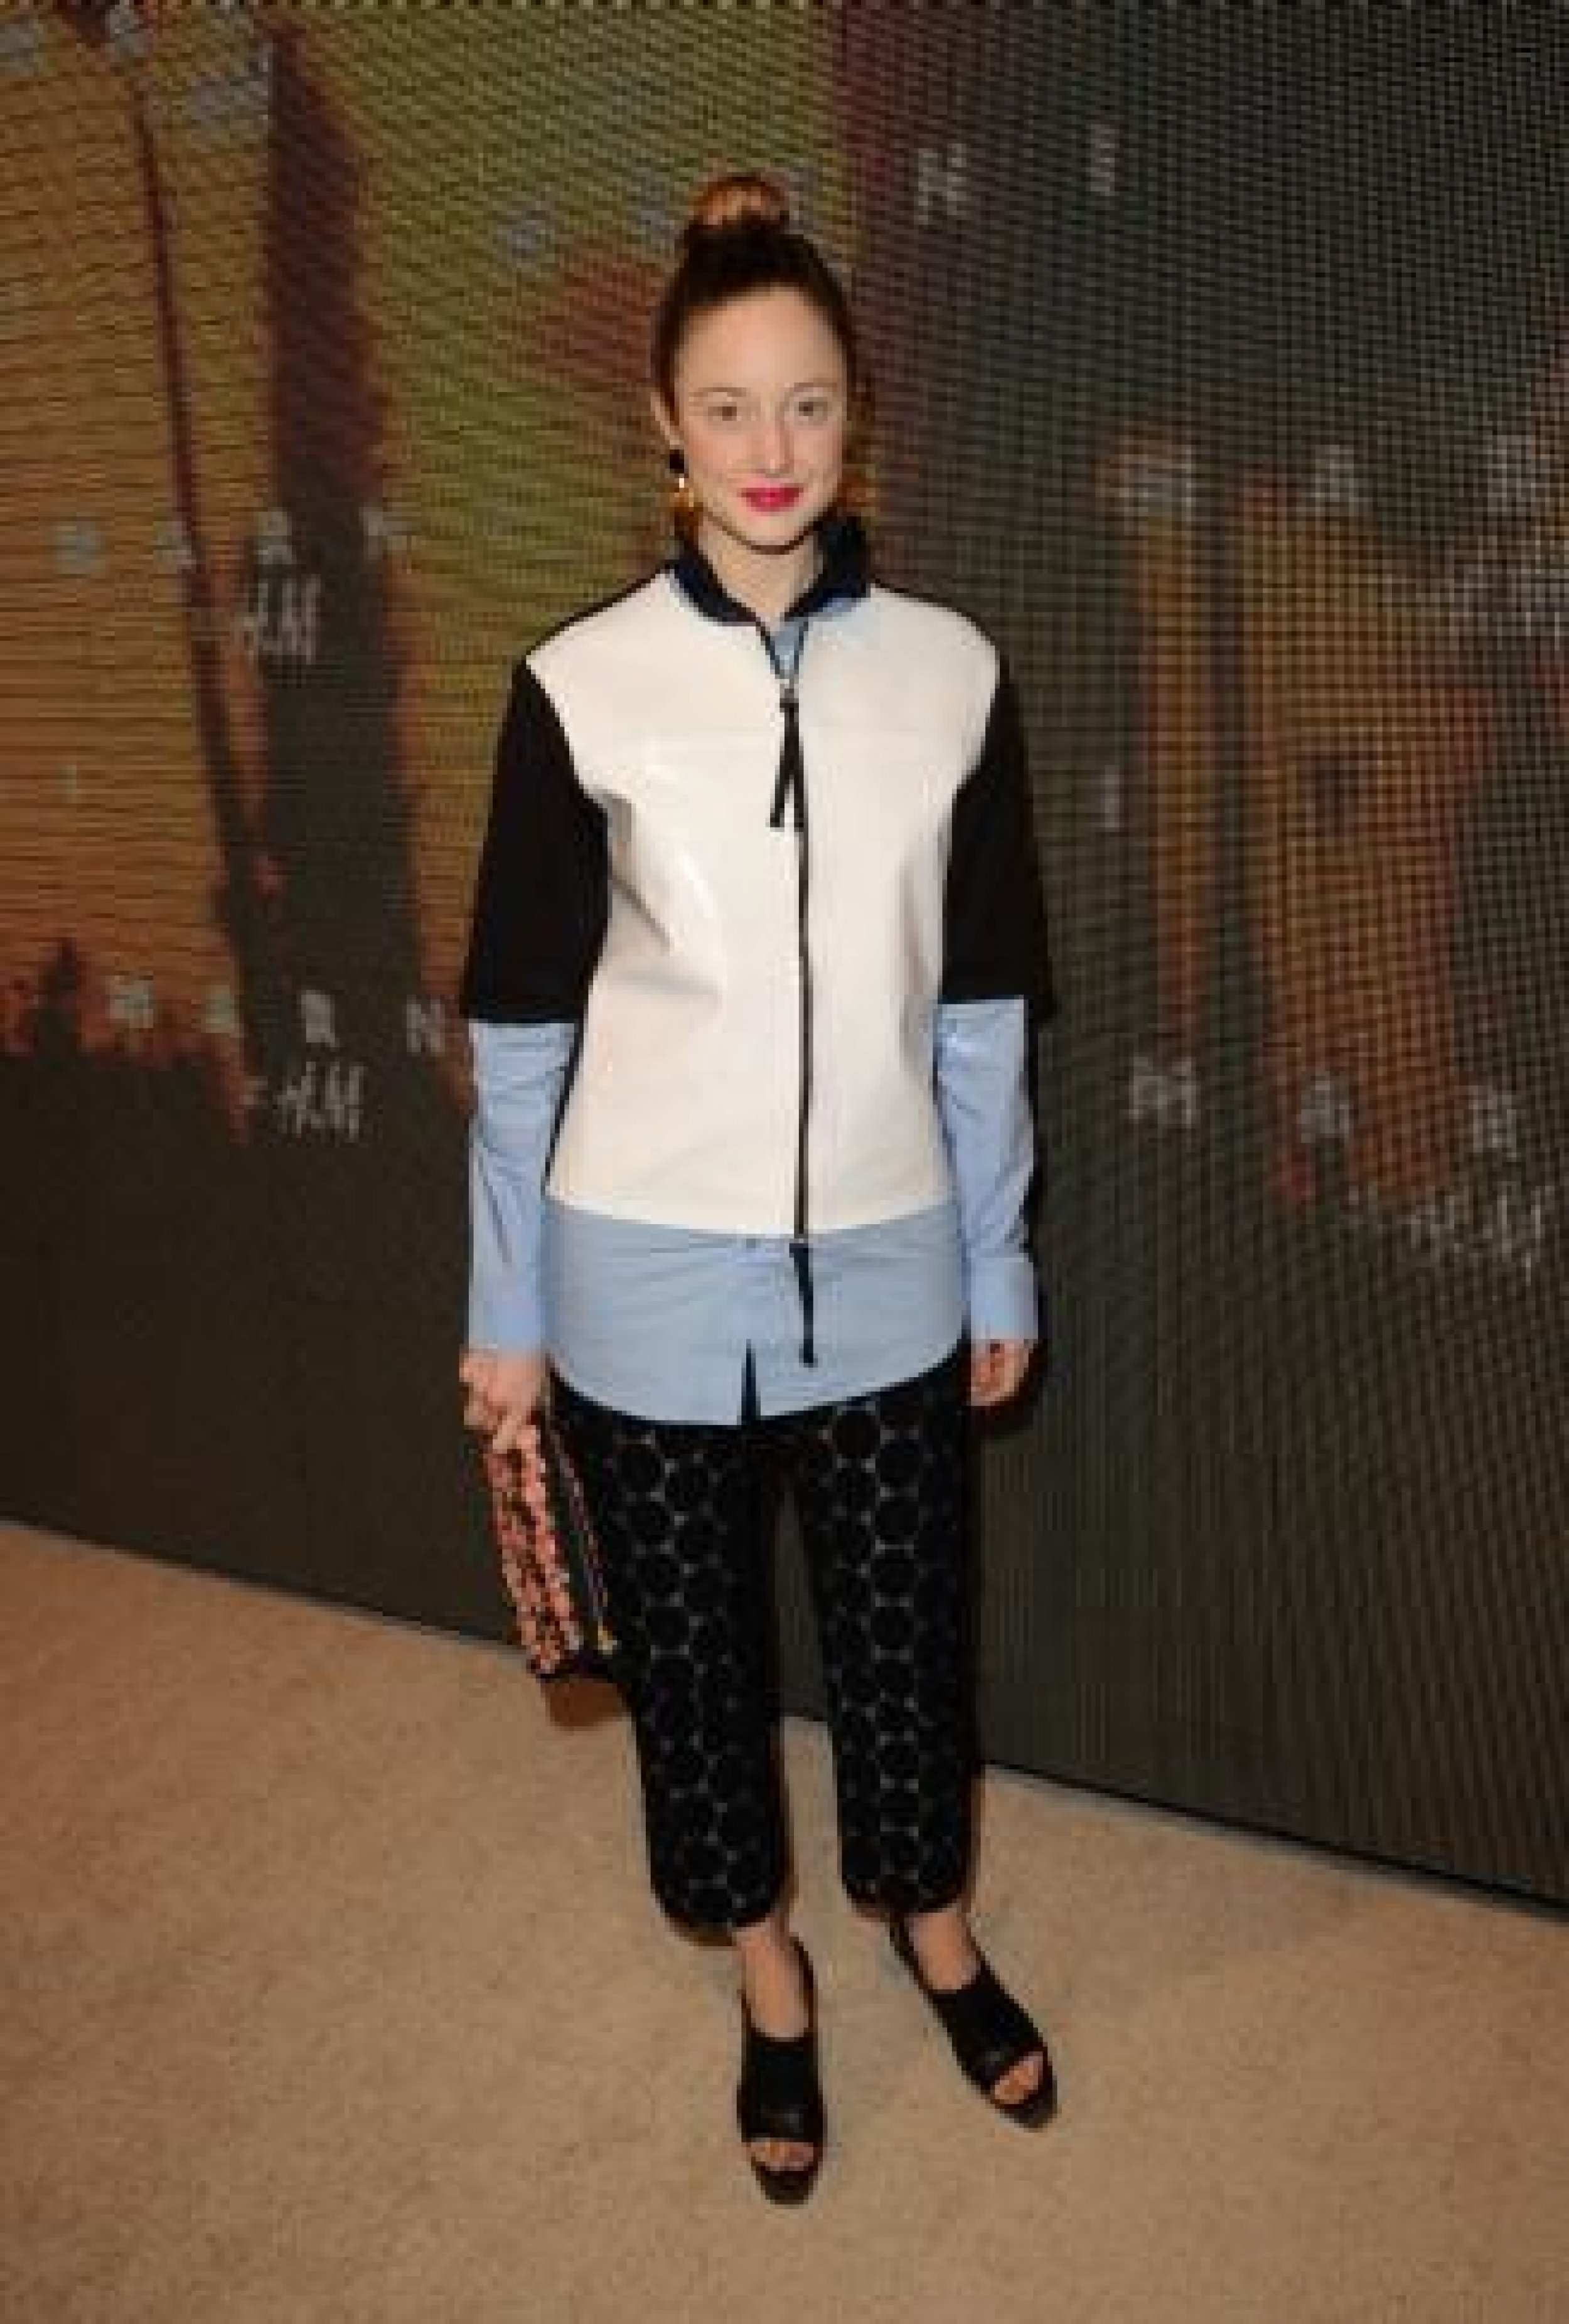 Marni for HM Bash Drew Barrymore, Lily Colllins, Freida Pinto and Others at the Event 